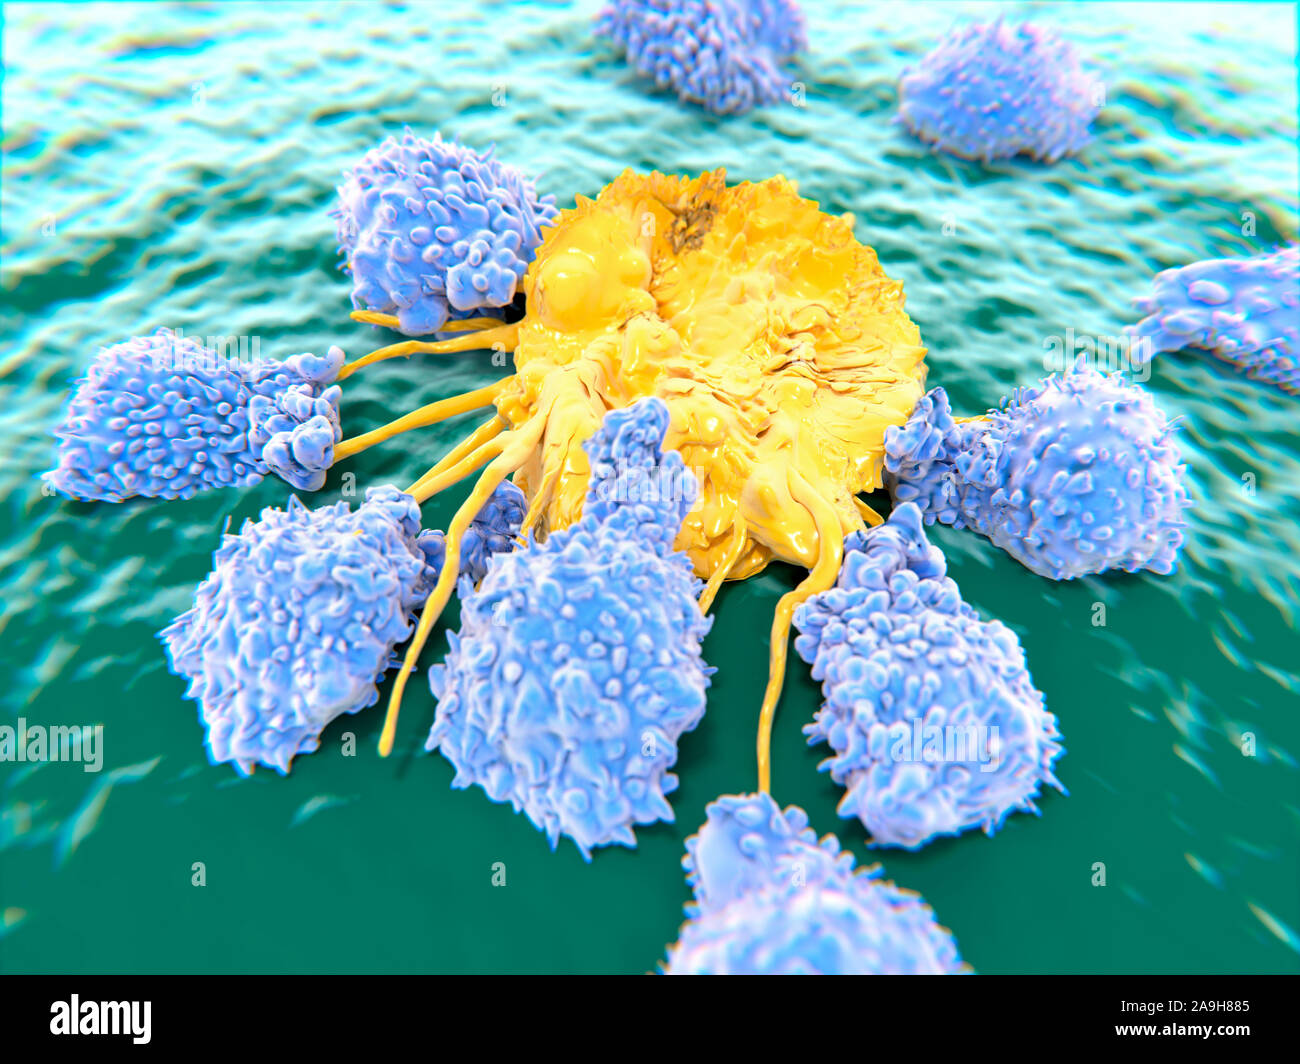 Lymphocytes attacking a cancer cell, illustration Stock Photo